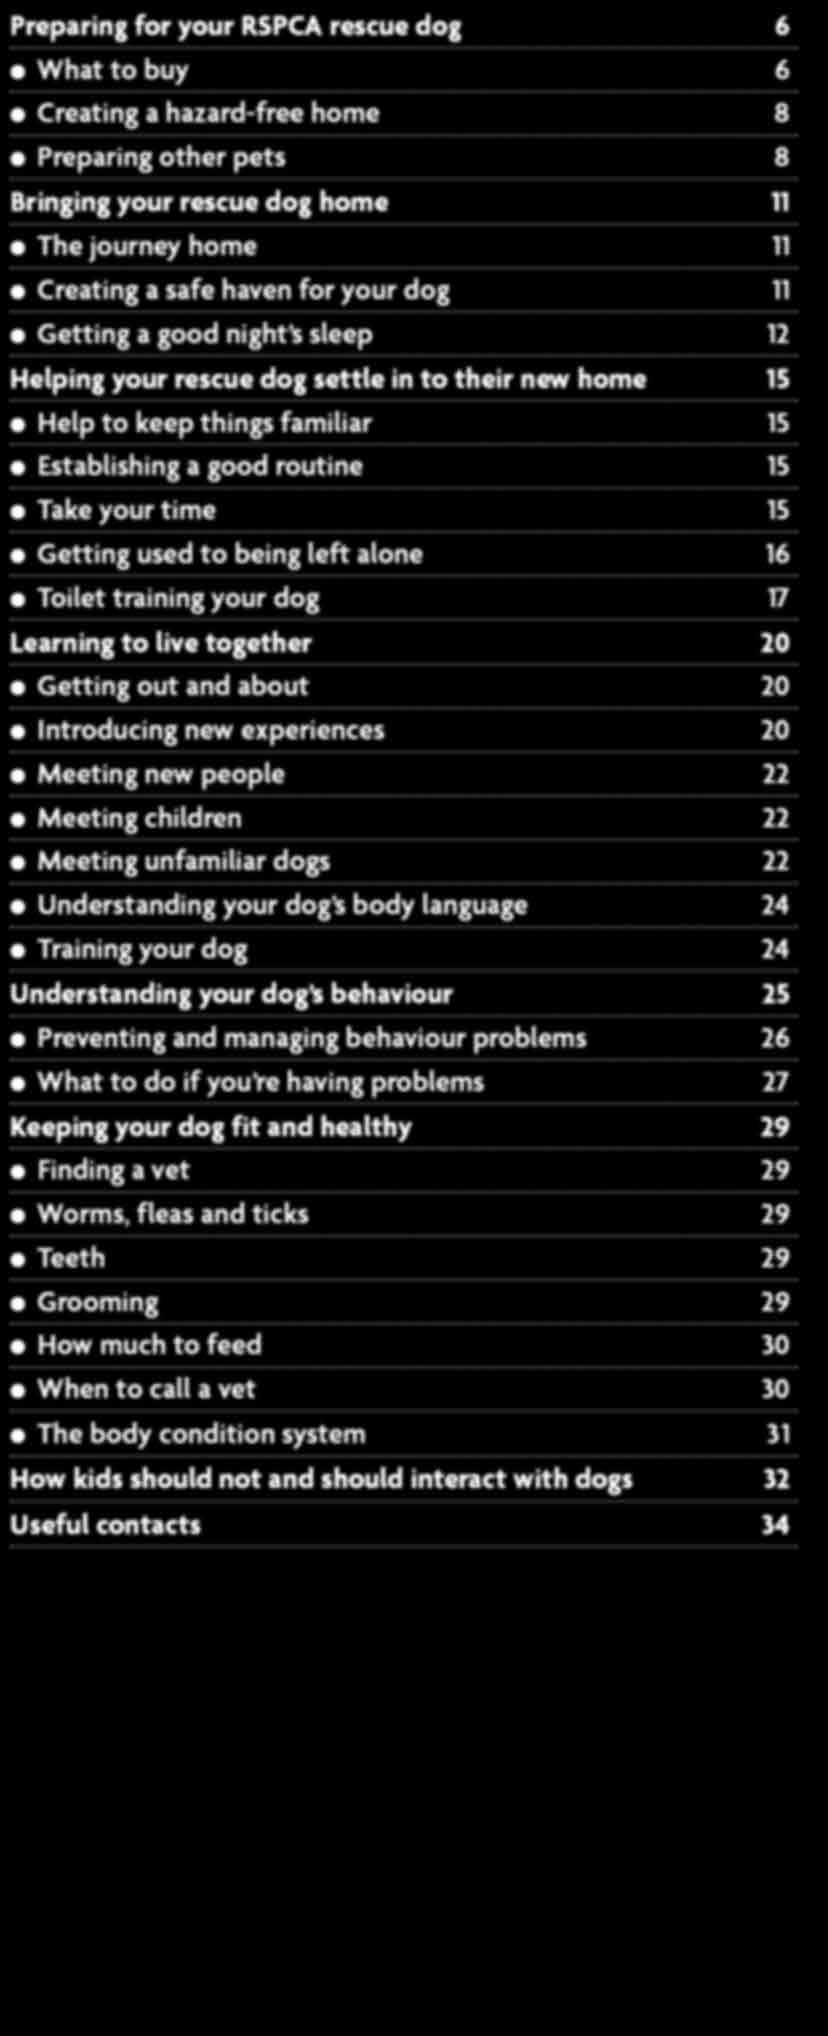 experiences 20 l Meeting new people 22 l Meeting children 22 l Meeting unfamiliar dogs 22 l Understanding your dog s body language 24